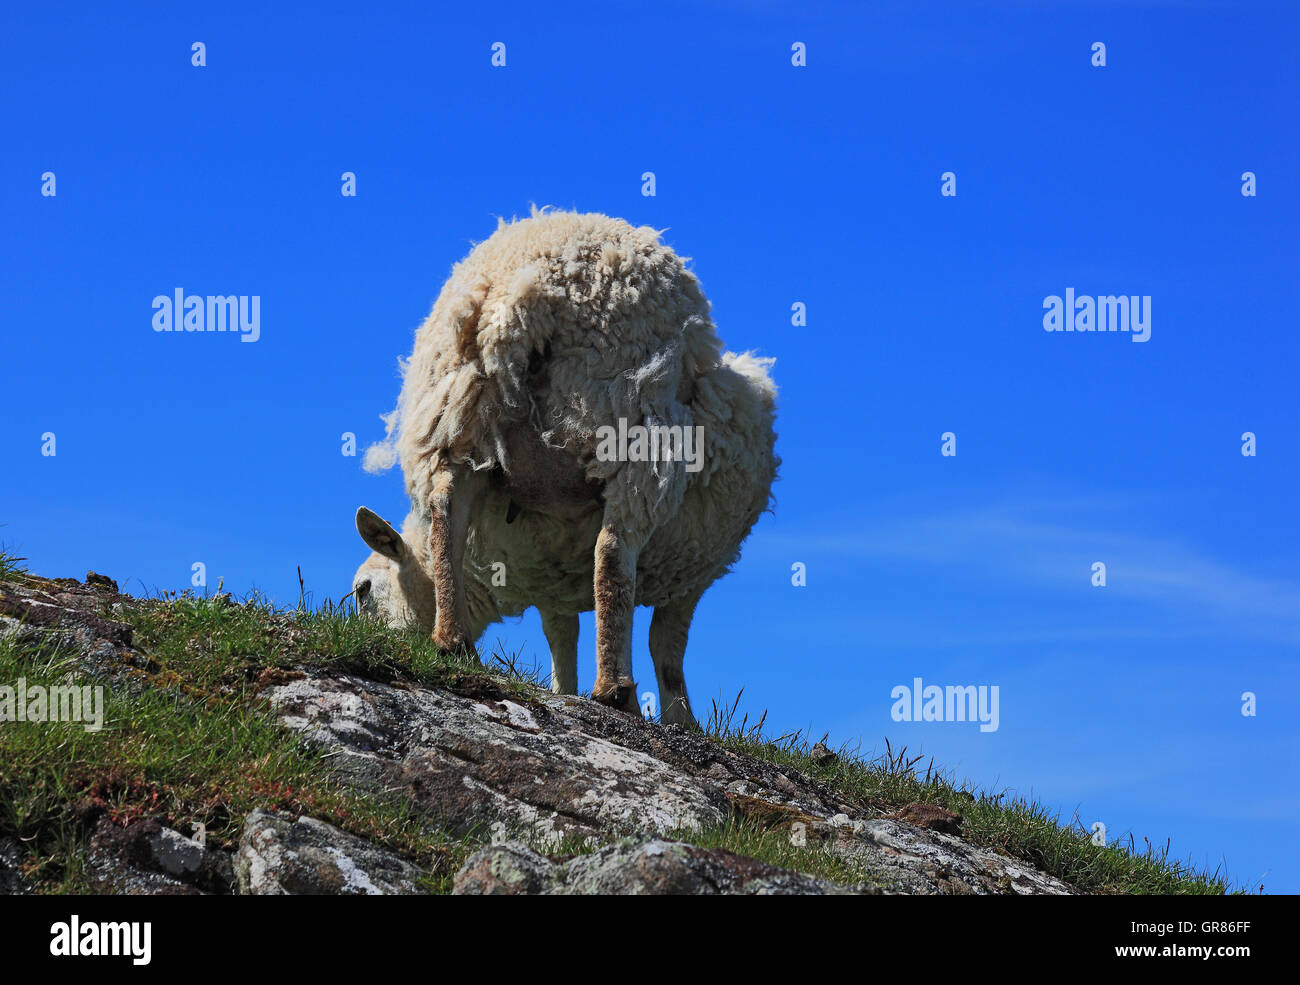 Sheep from the back, looks on a rocky subsoil for feed Stock Photo